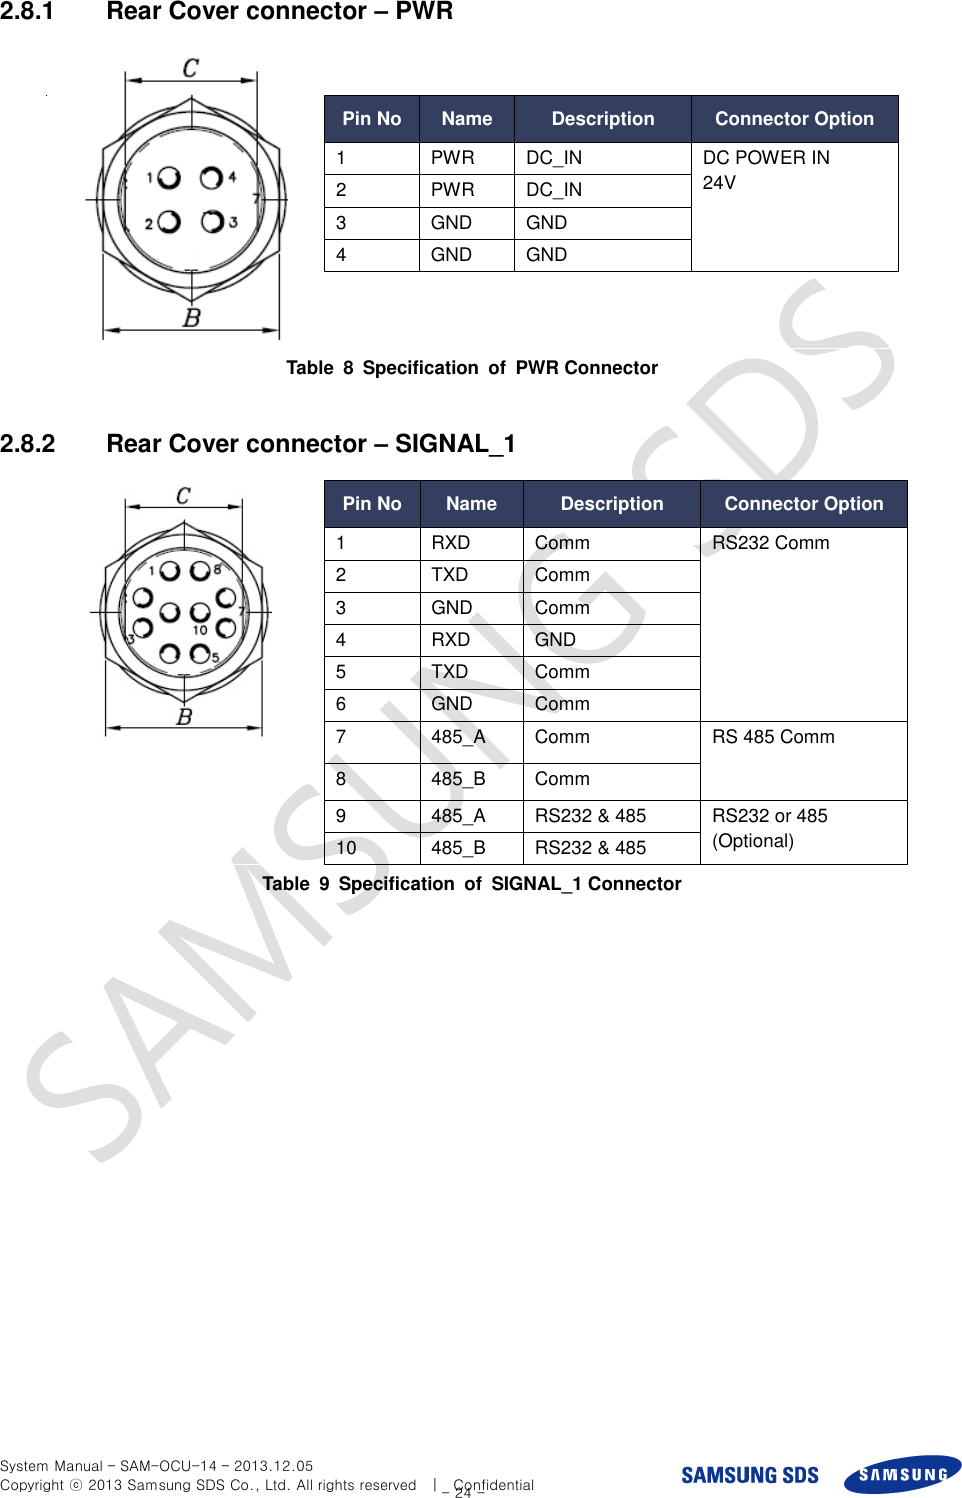  System Manual – SAM-OCU-14 – 2013.12.05 Copyright ⓒ 2013 Samsung SDS Co., Ltd. All rights reserved    |    Confidential - 24 - 2.8.1  Rear Cover connector – PWR      Pin No Name Description Connector Option 1 PWR DC_IN DC POWER IN   24V 2 PWR DC_IN     3 GND GND 4 GND GND  Table  8  Specification  of  PWR Connector  2.8.2  Rear Cover connector – SIGNAL_1   Pin No Name Description Connector Option 1 RXD Comm RS232 Comm 2 TXD Comm     3 GND Comm 4 RXD GND 5 TXD Comm 6 GND Comm 7 485_A Comm RS 485 Comm 8 485_B Comm 9 485_A RS232 &amp; 485 RS232 or 485 (Optional) 10 485_B RS232 &amp; 485 Table  9  Specification  of  SIGNAL_1 Connector  